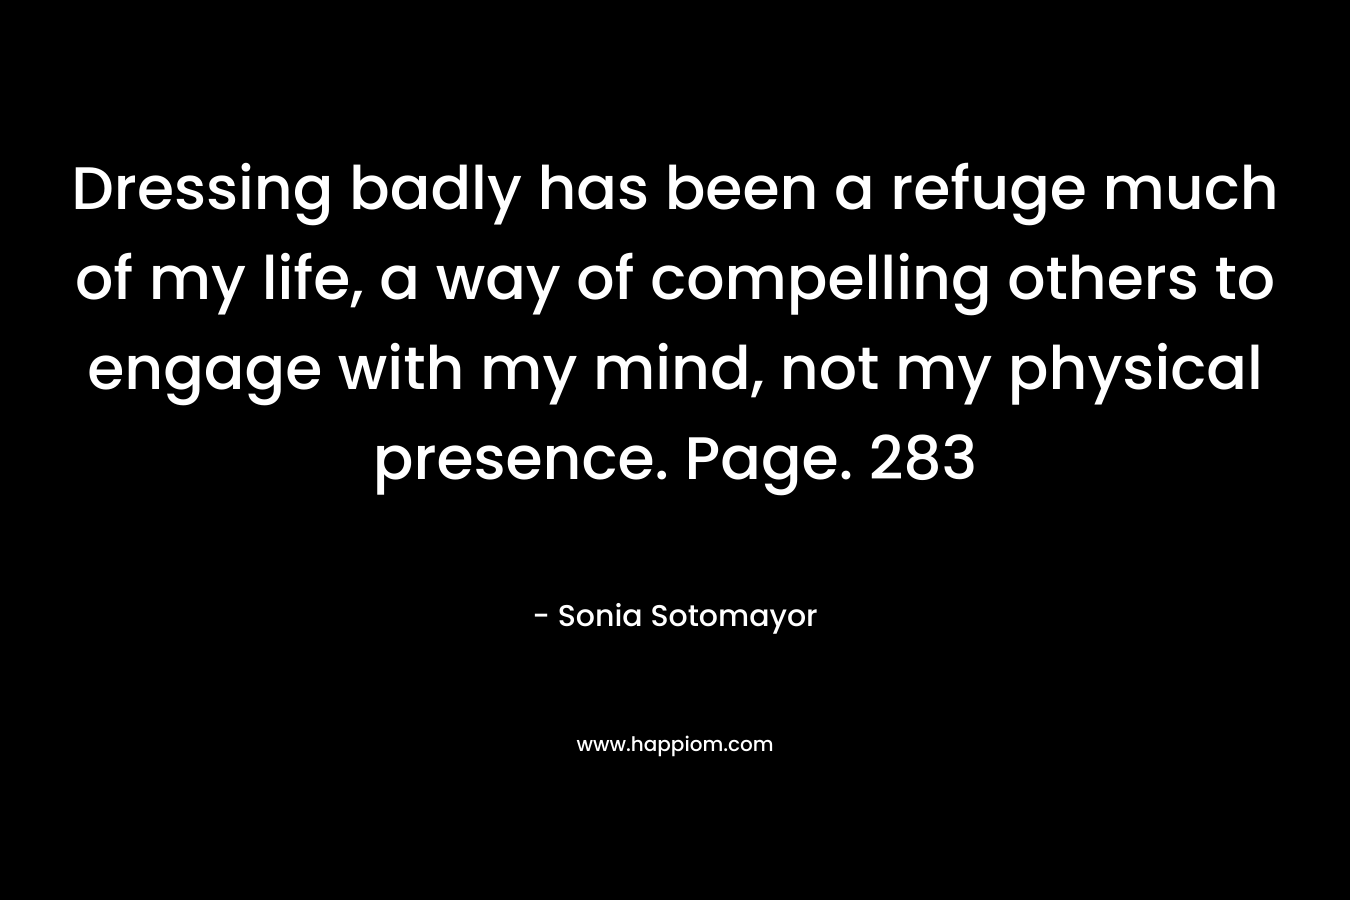 Dressing badly has been a refuge much of my life, a way of compelling others to engage with my mind, not my physical presence. Page. 283 – Sonia Sotomayor